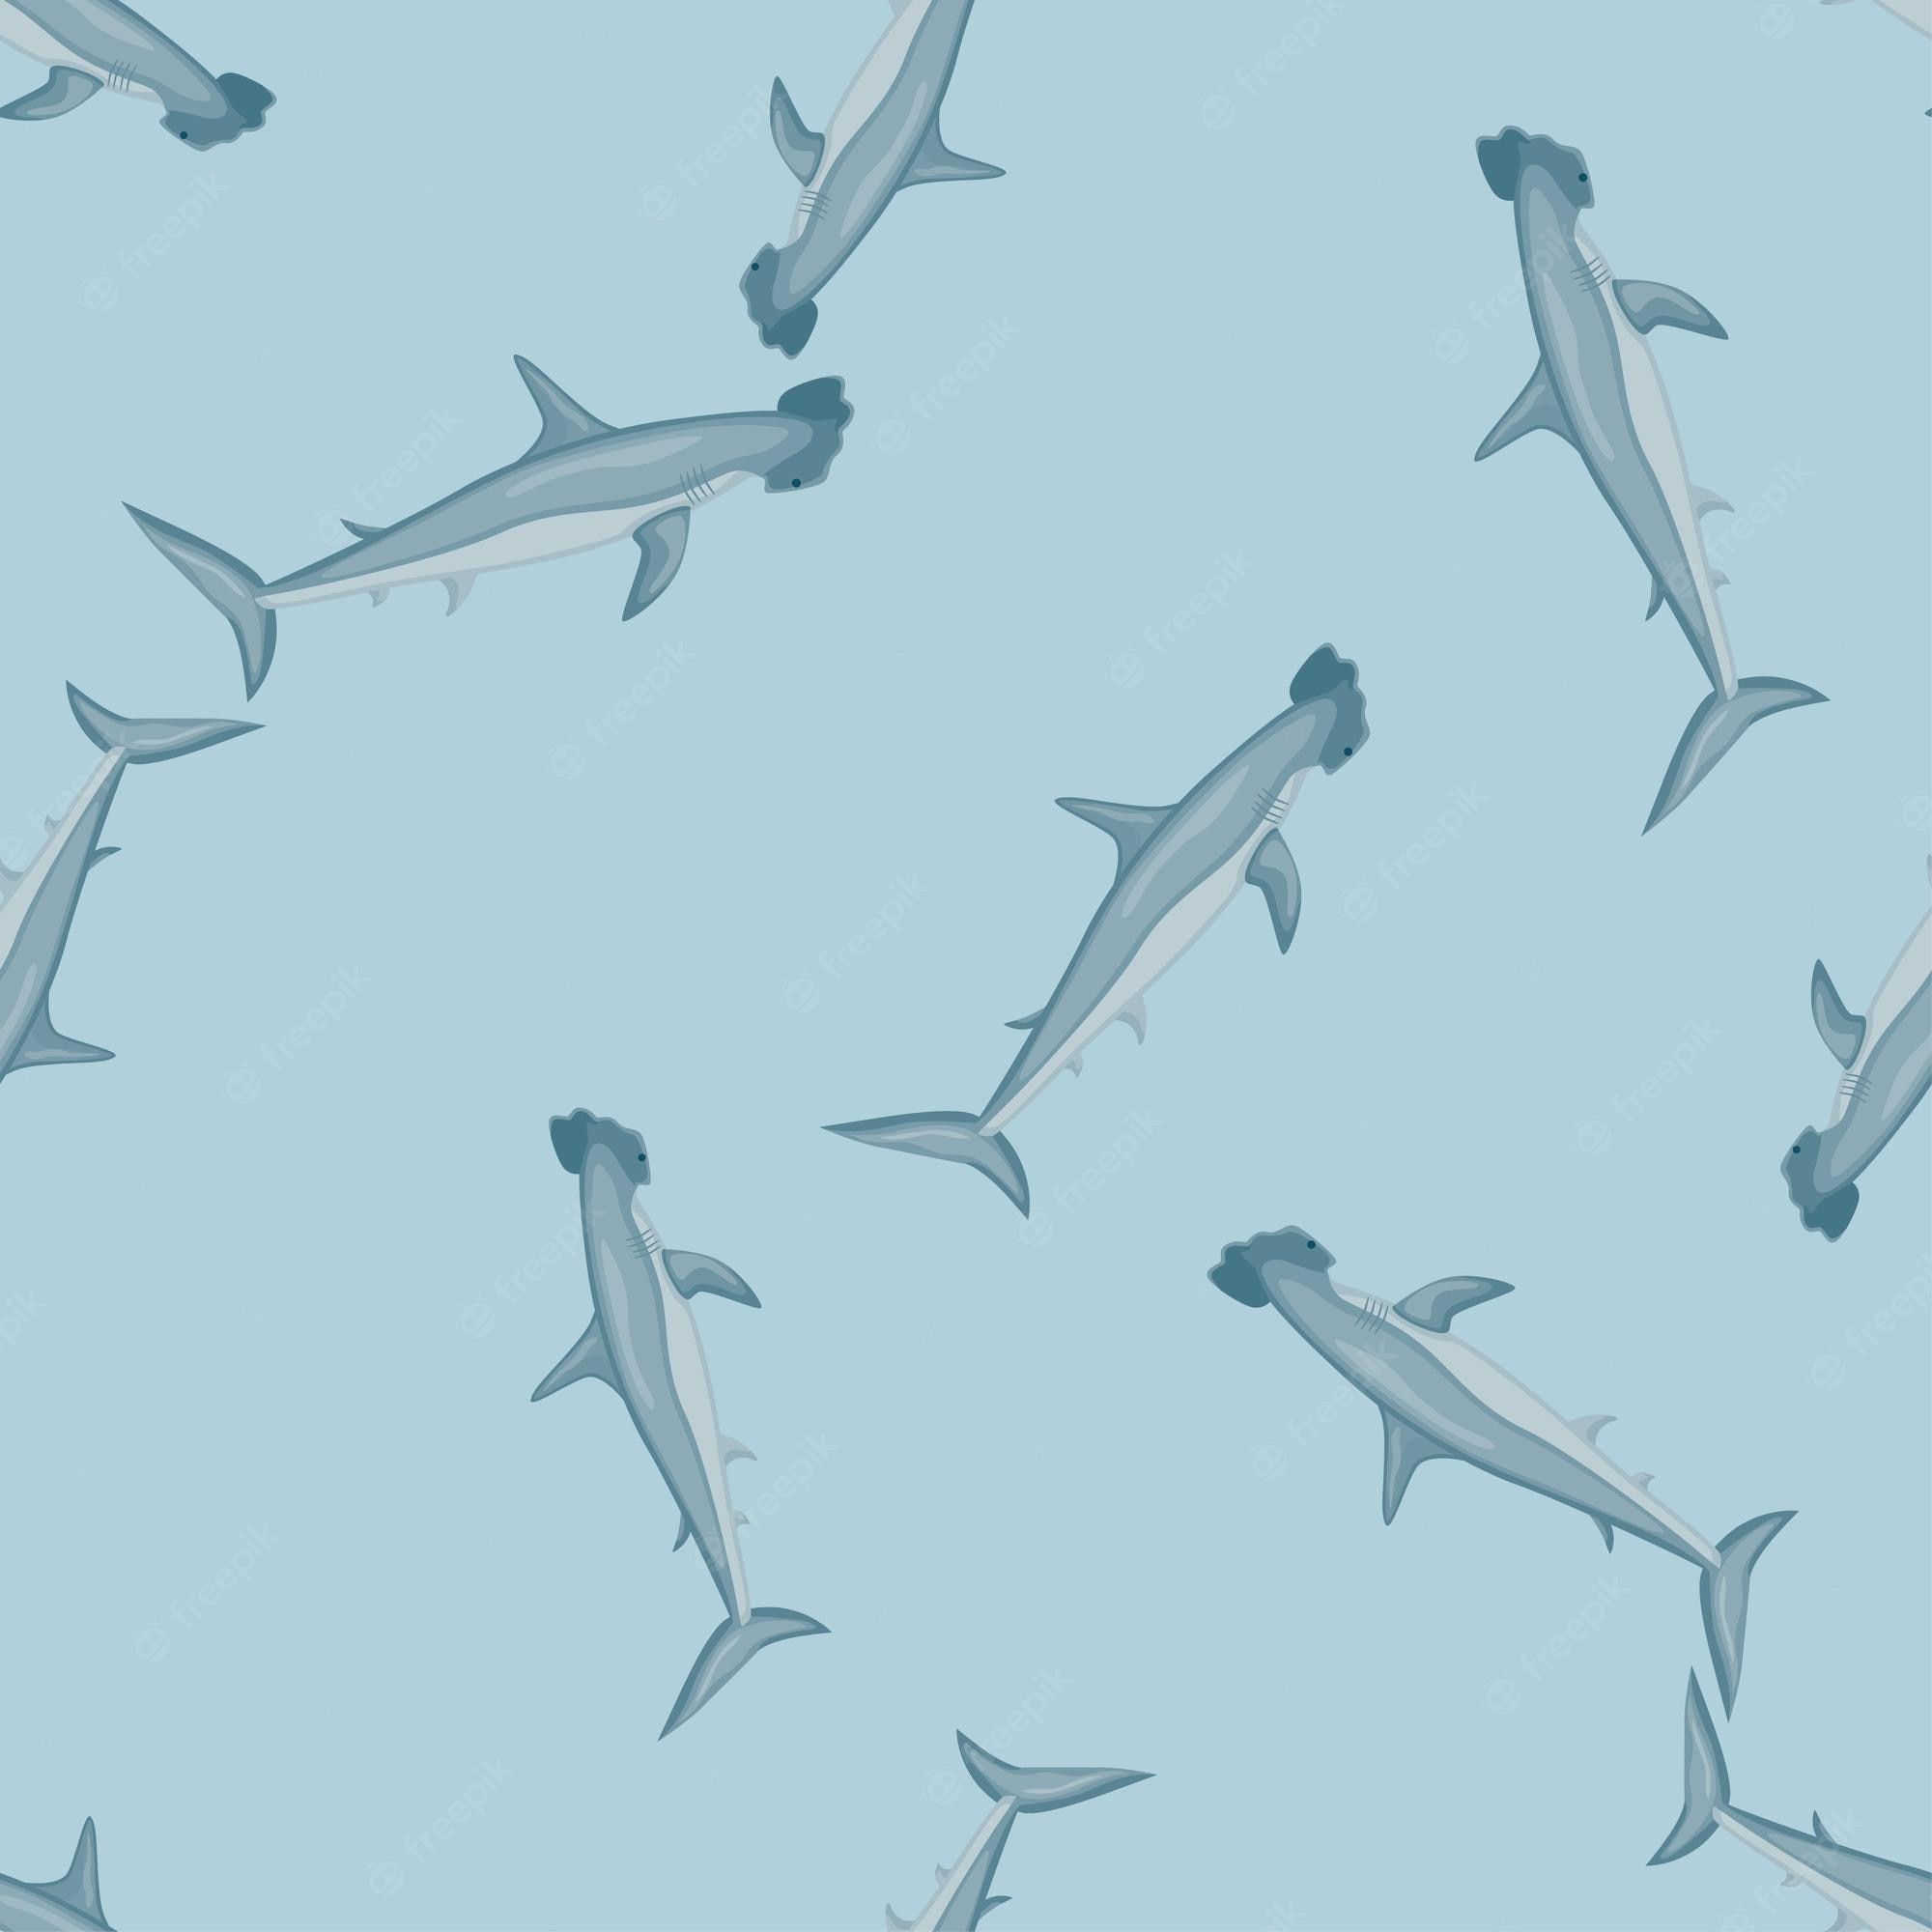 Premium vector hammerhead shark seamless pattern in scandinavian style marine animals background vector illustration for children funny textile prints fabric banners backdrops and wallpapers